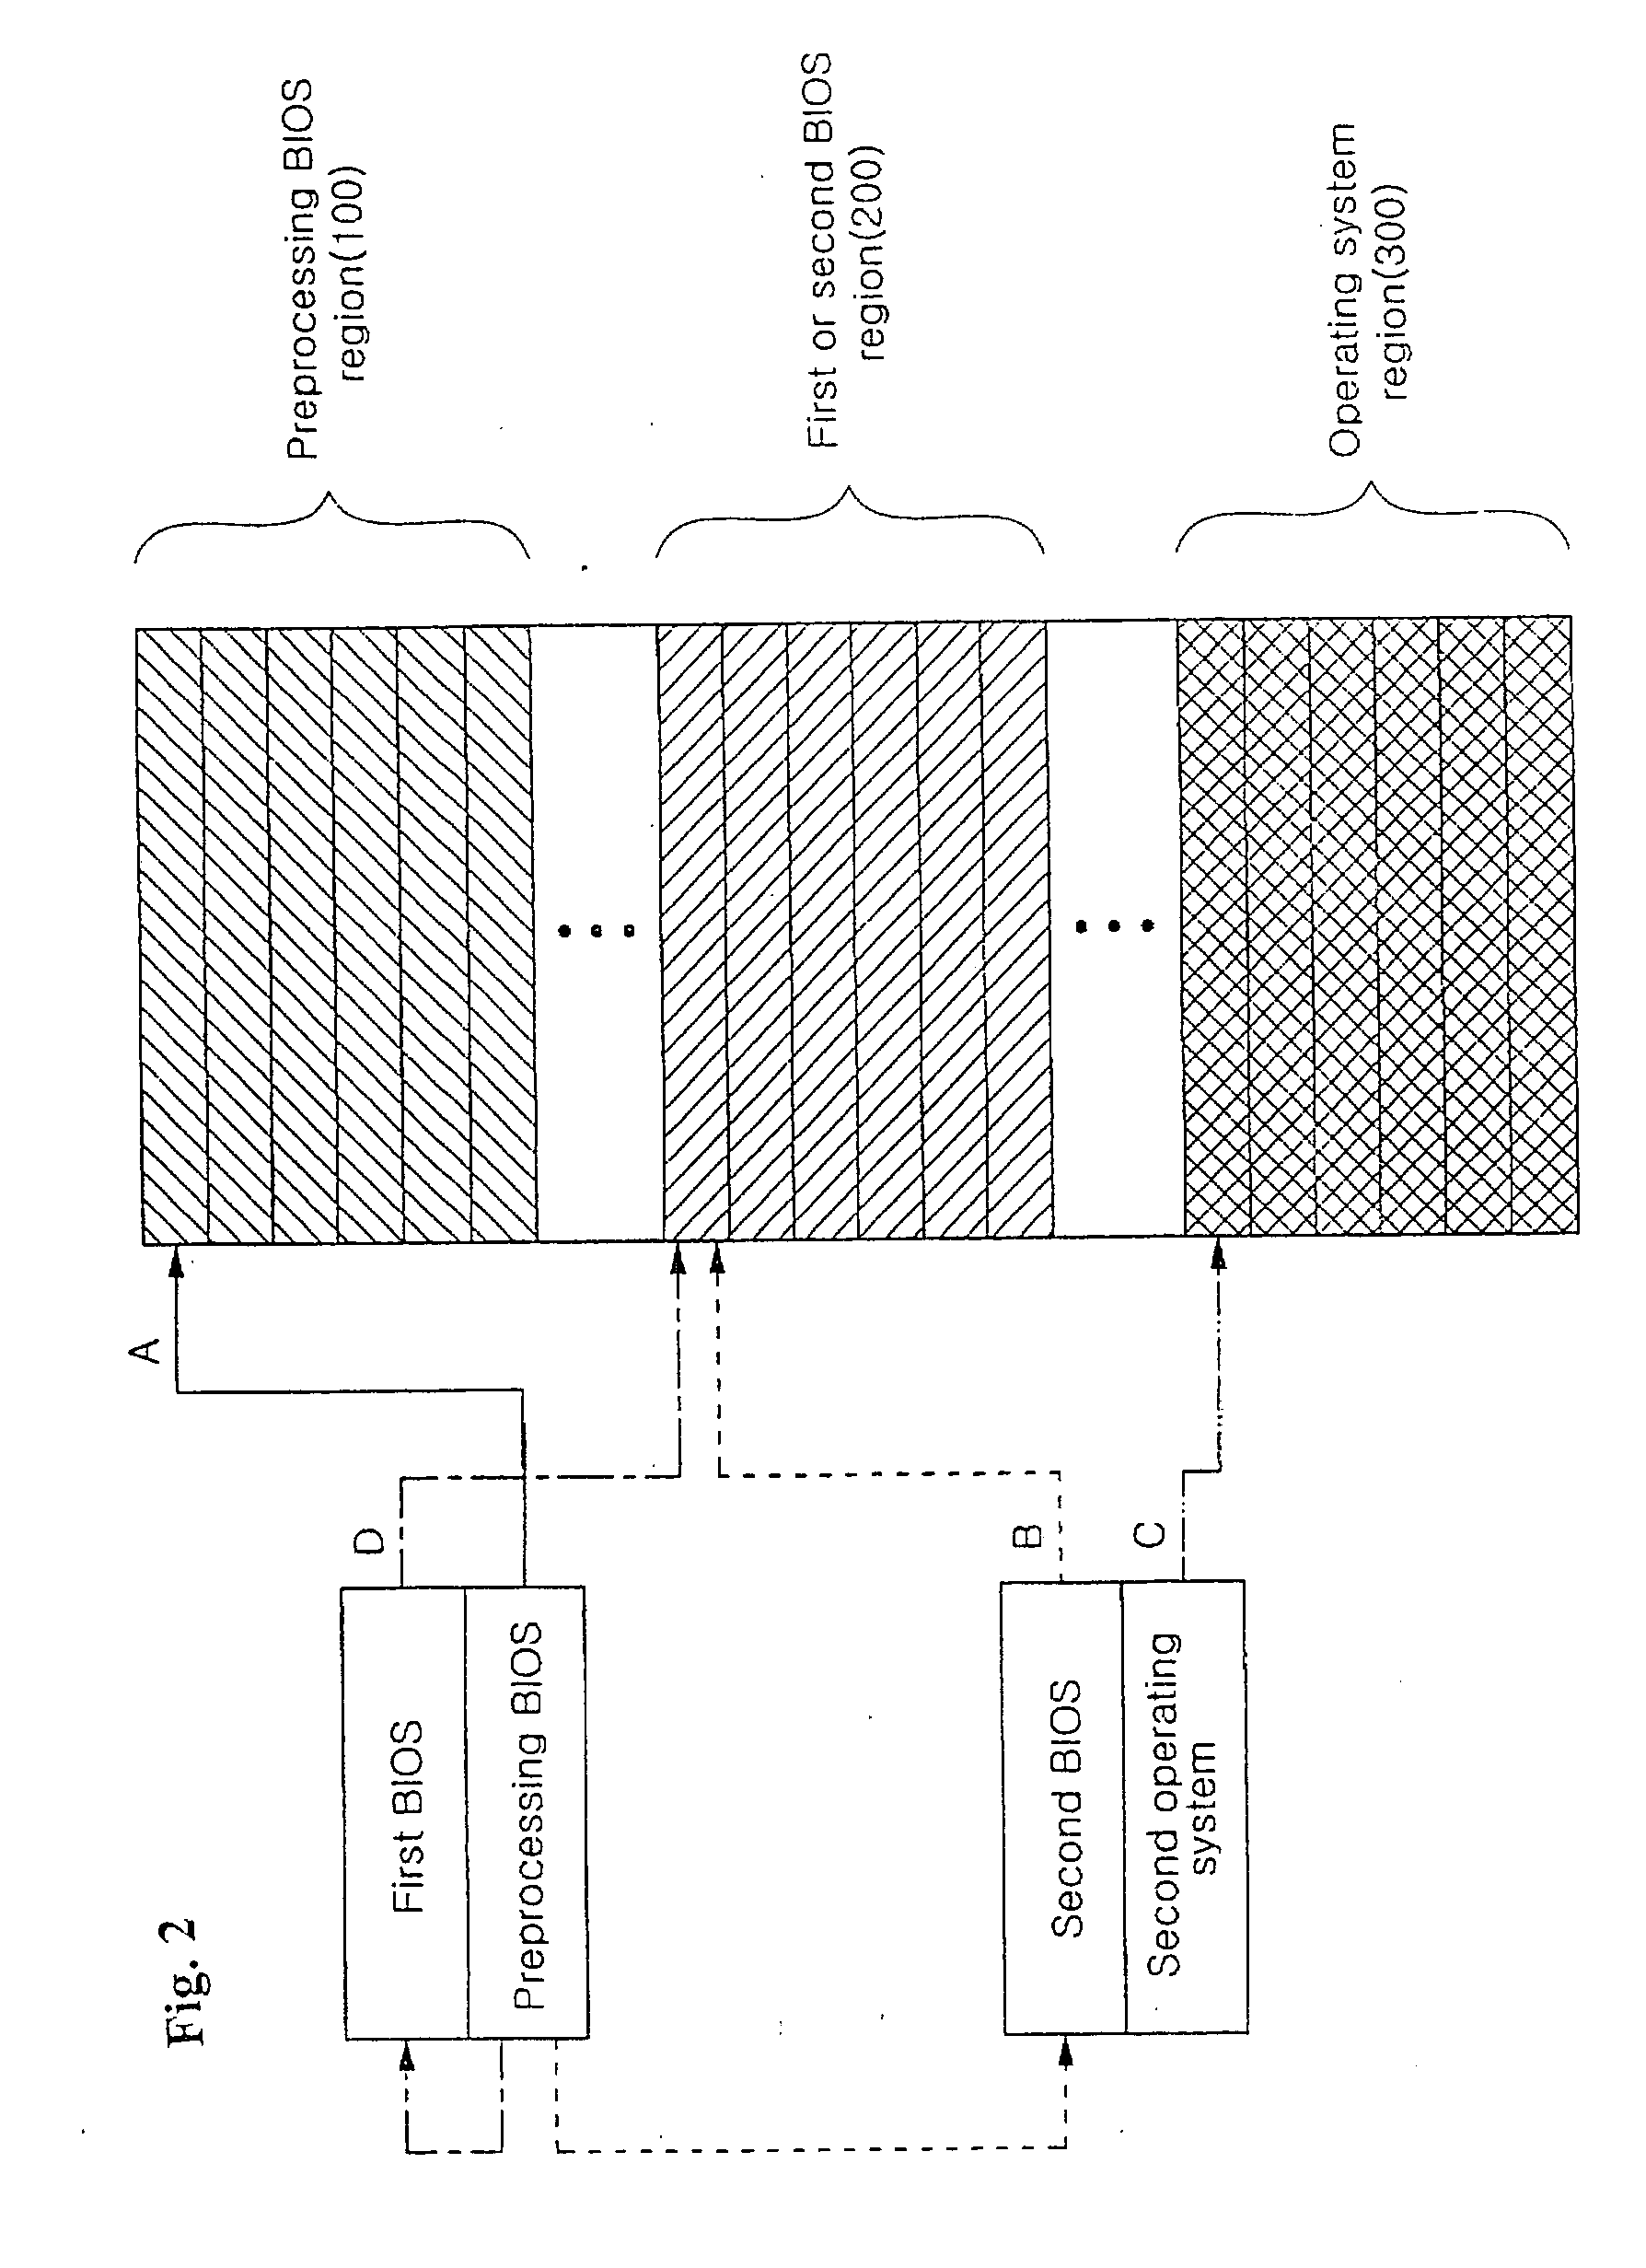 Portable apparatus supporting multiple operating systems and supporting method therefor